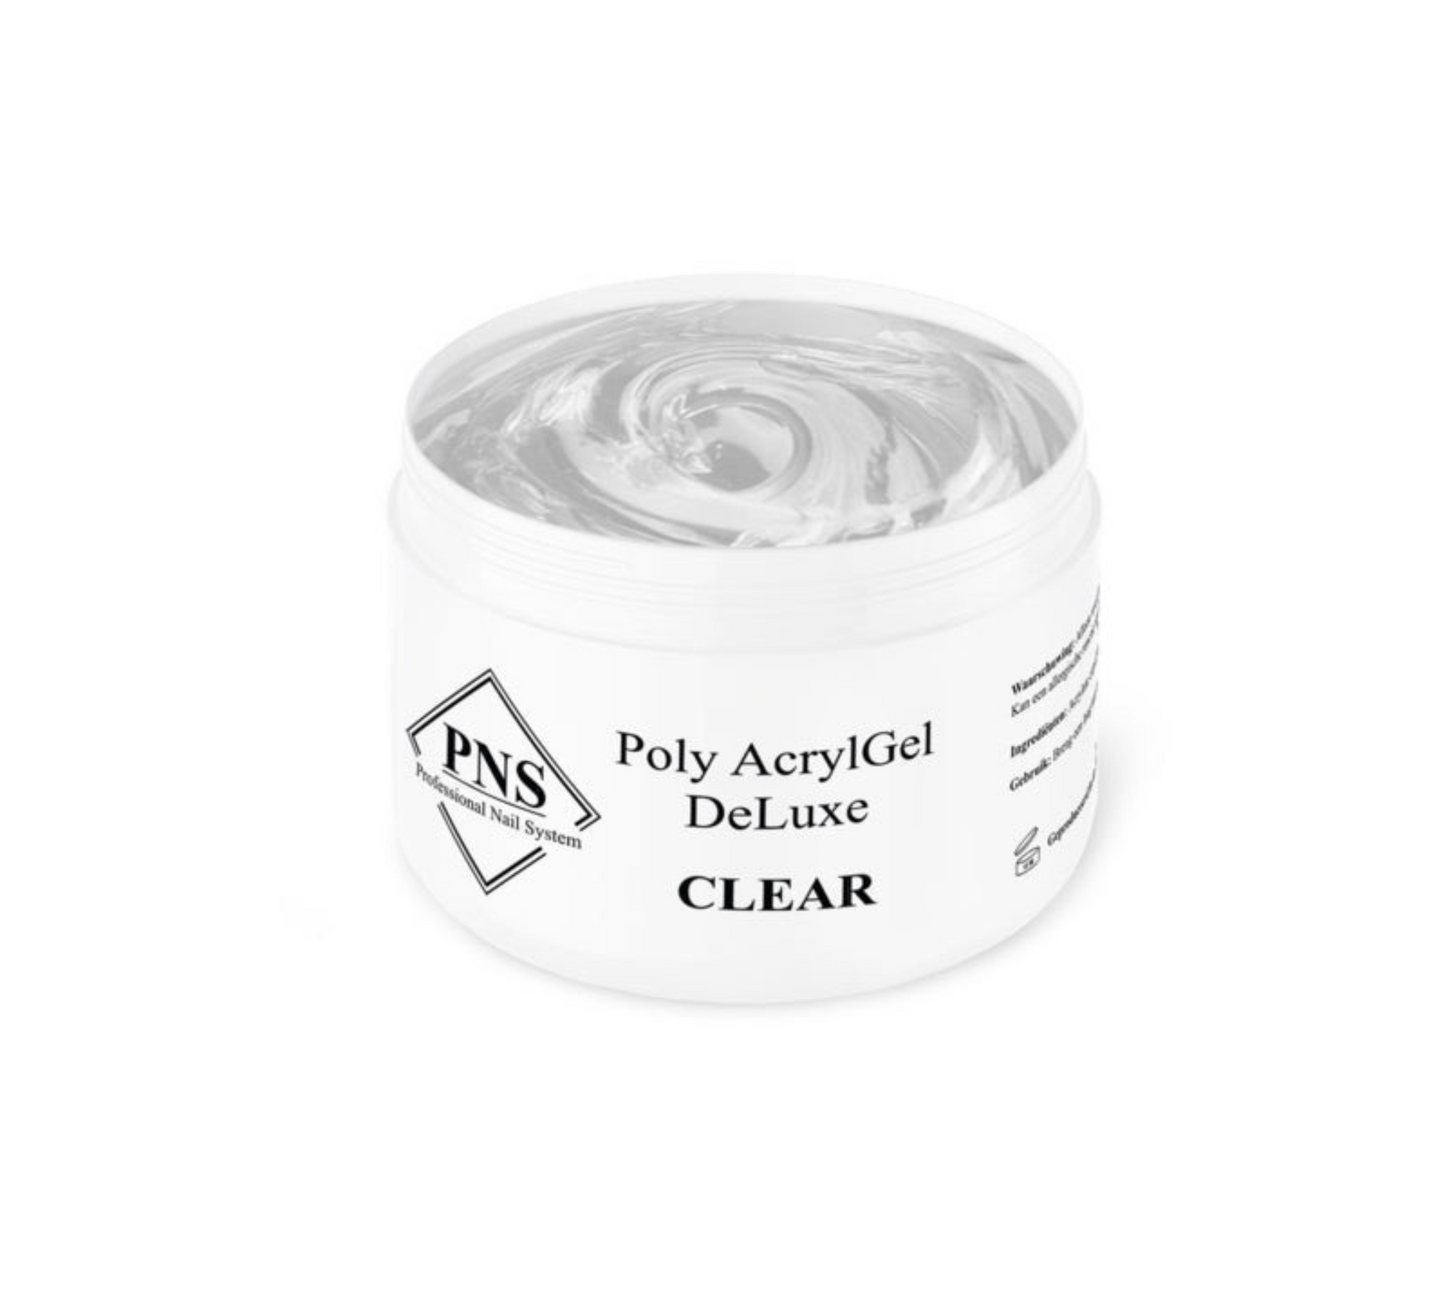 PNS Poly Acrylgel DeLuxe Clear 5ml